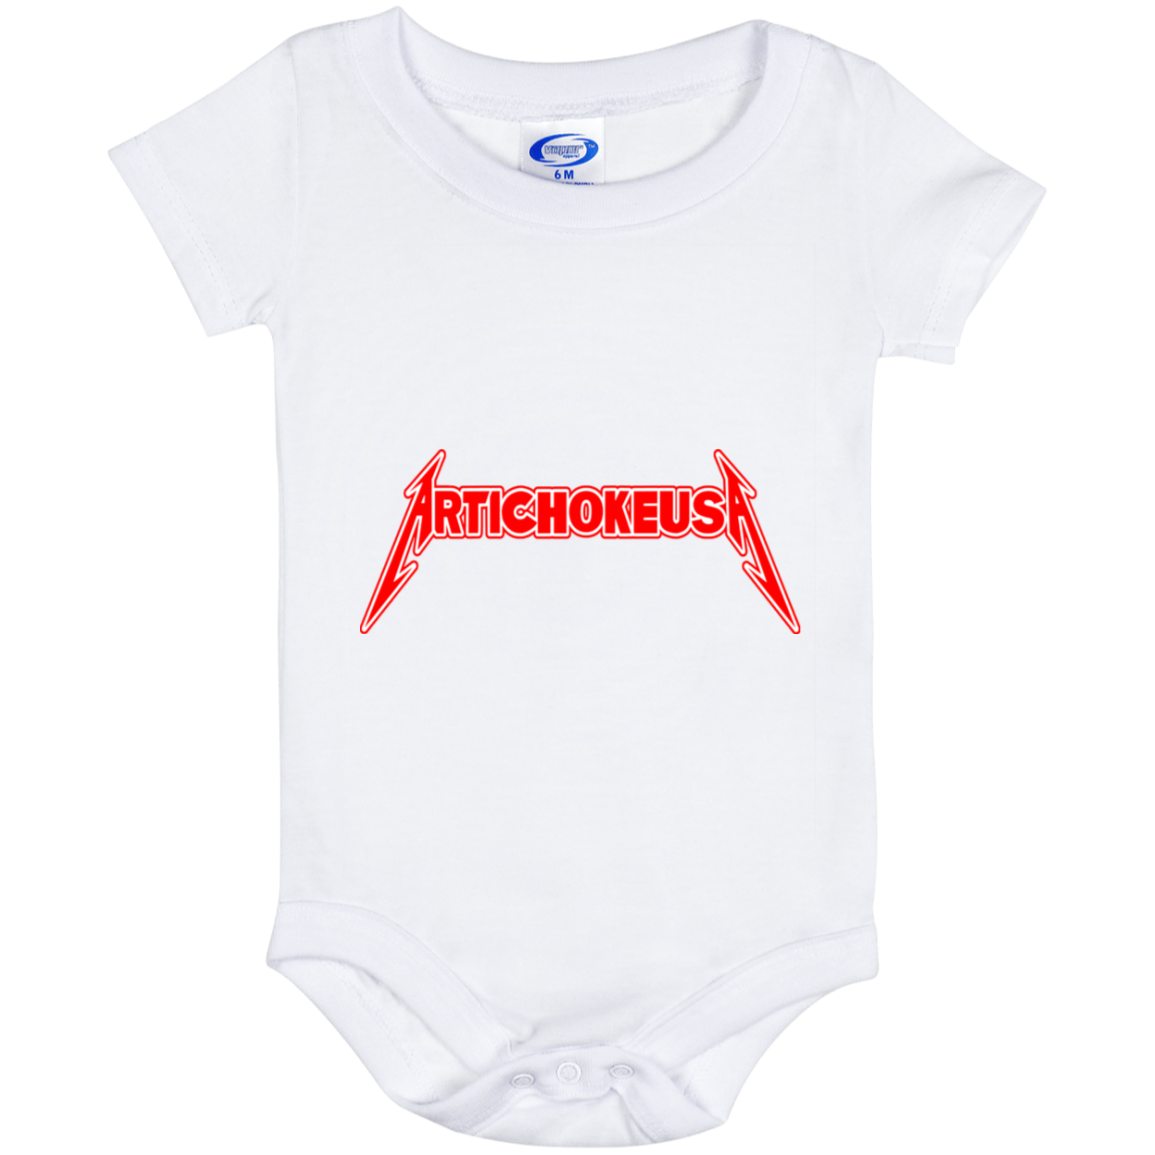 ArtichokeUSA Custom Design. Metallica Style Logo. Let's Make One For Your Project. Baby Onesie 6 Month